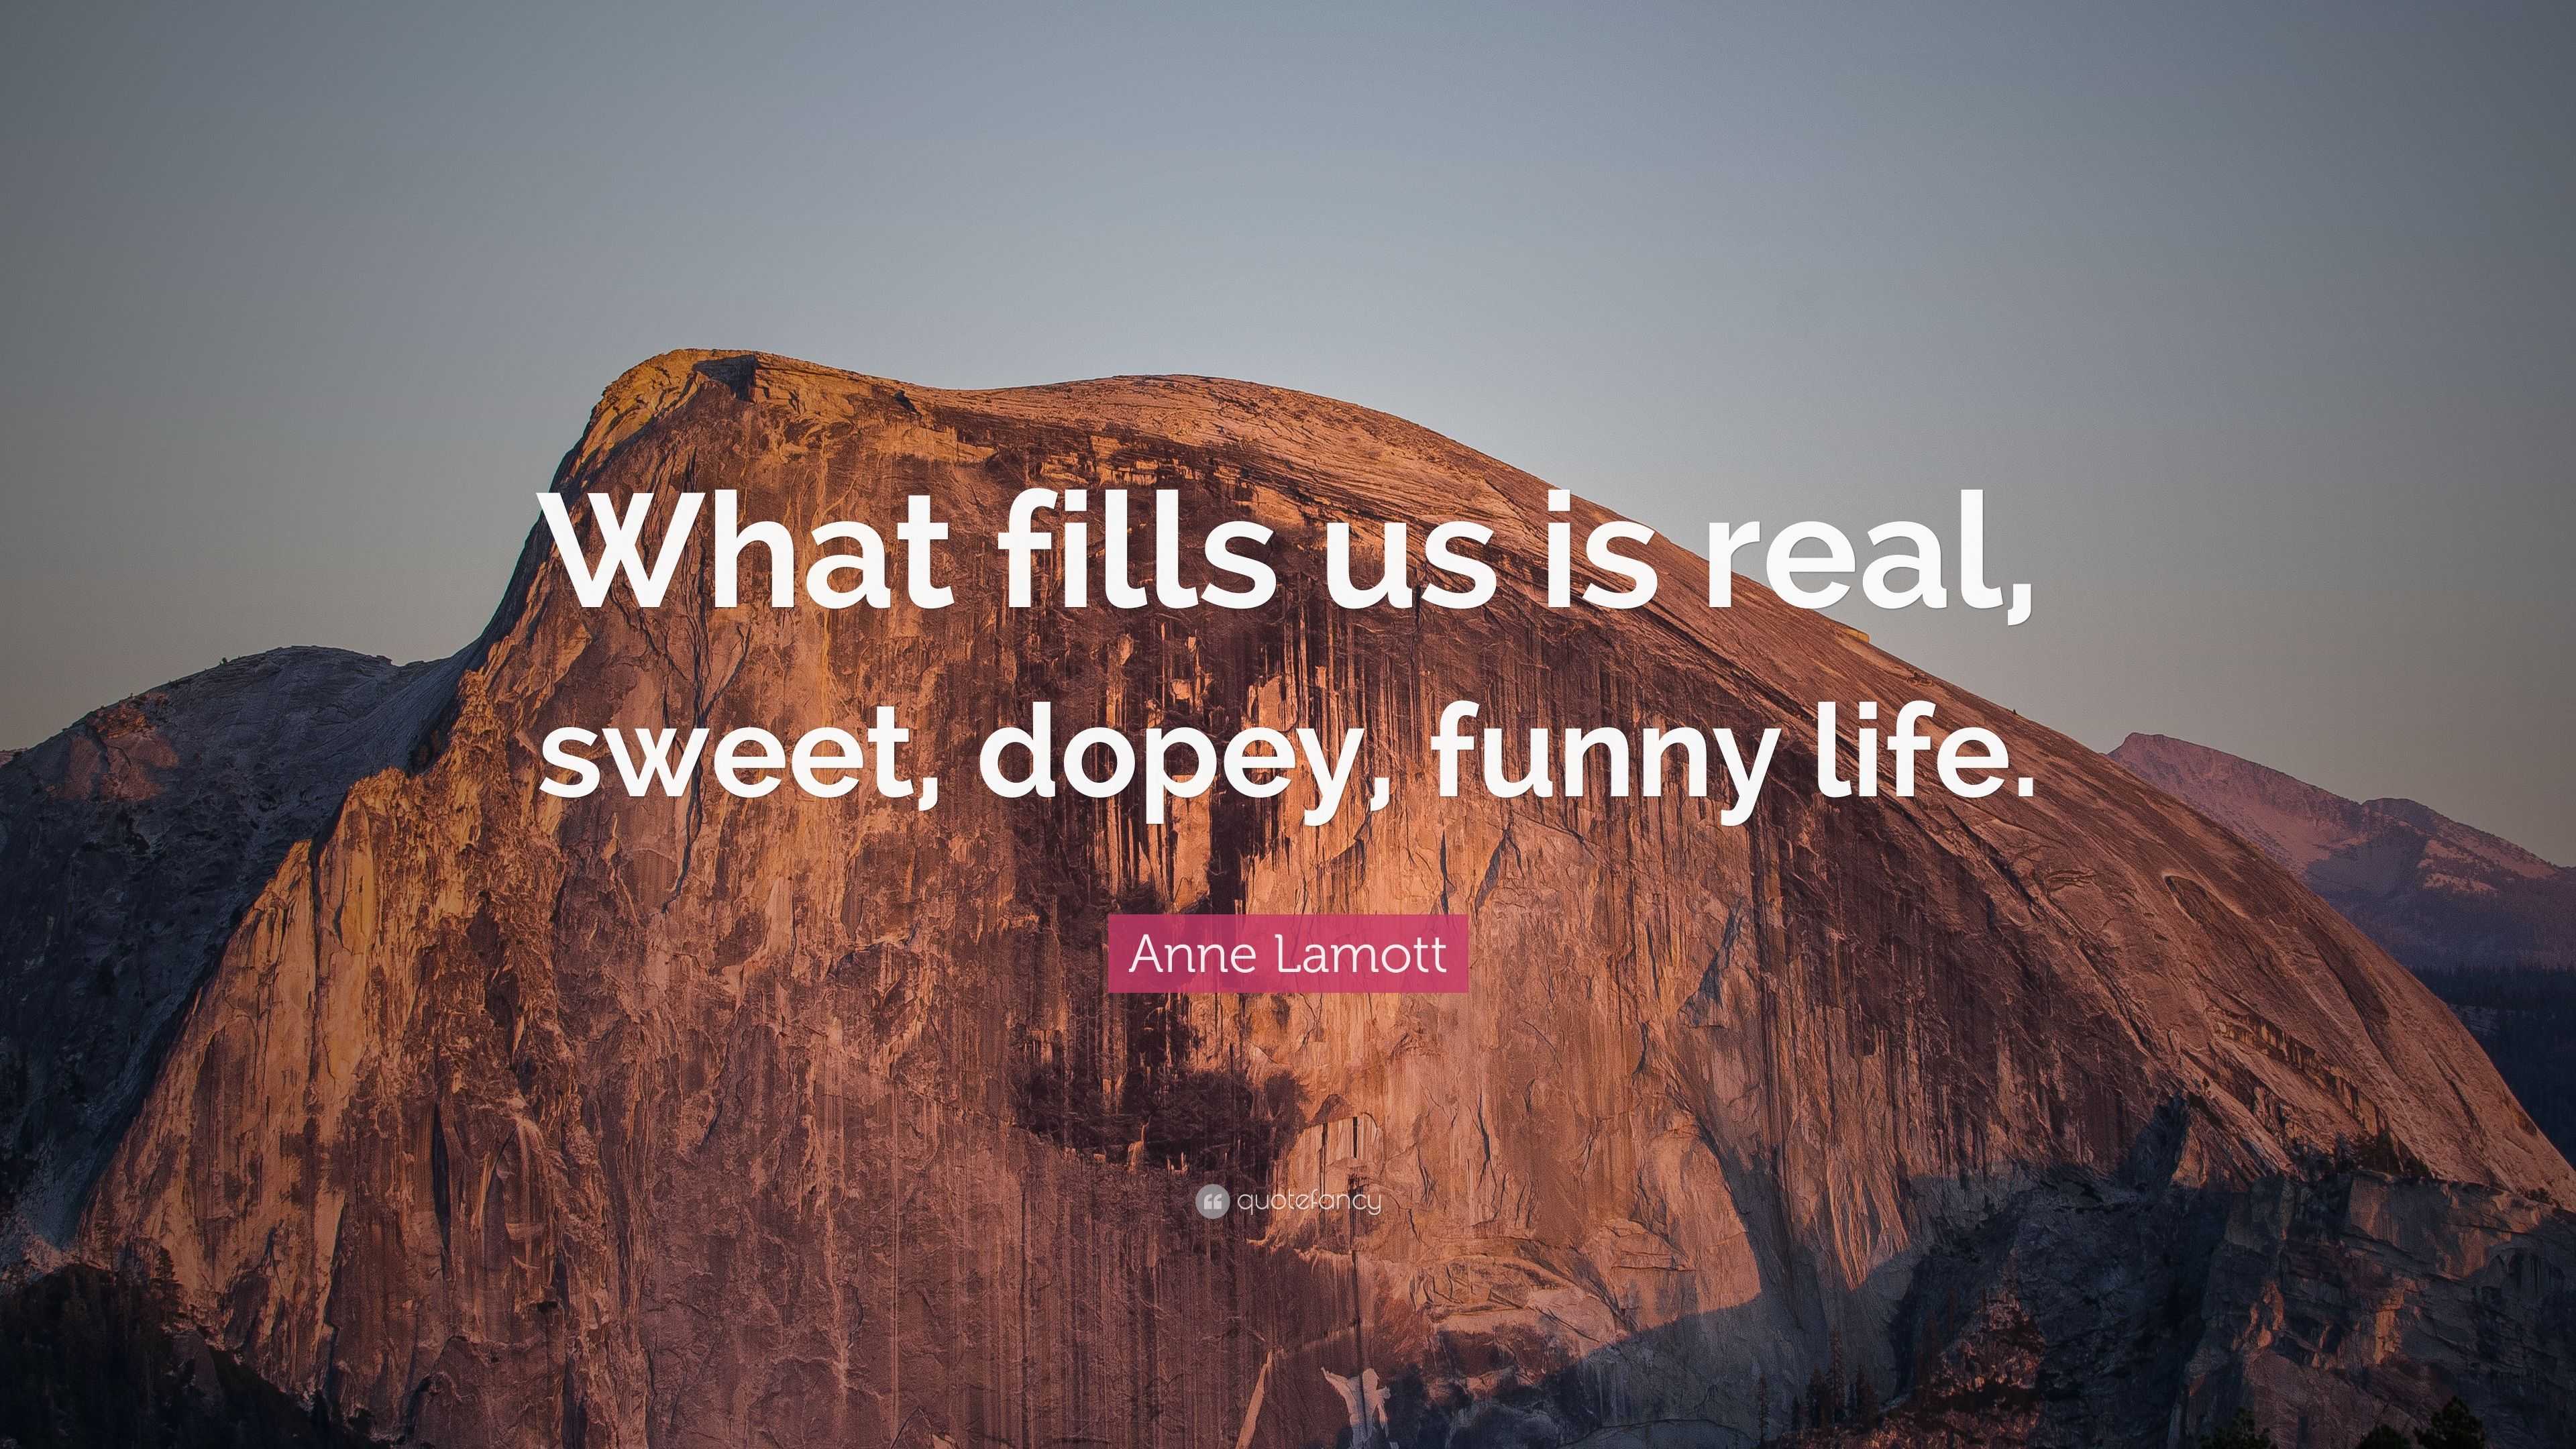 Anne Lamott Quote: “What fills us is real, sweet, dopey, funny life.”